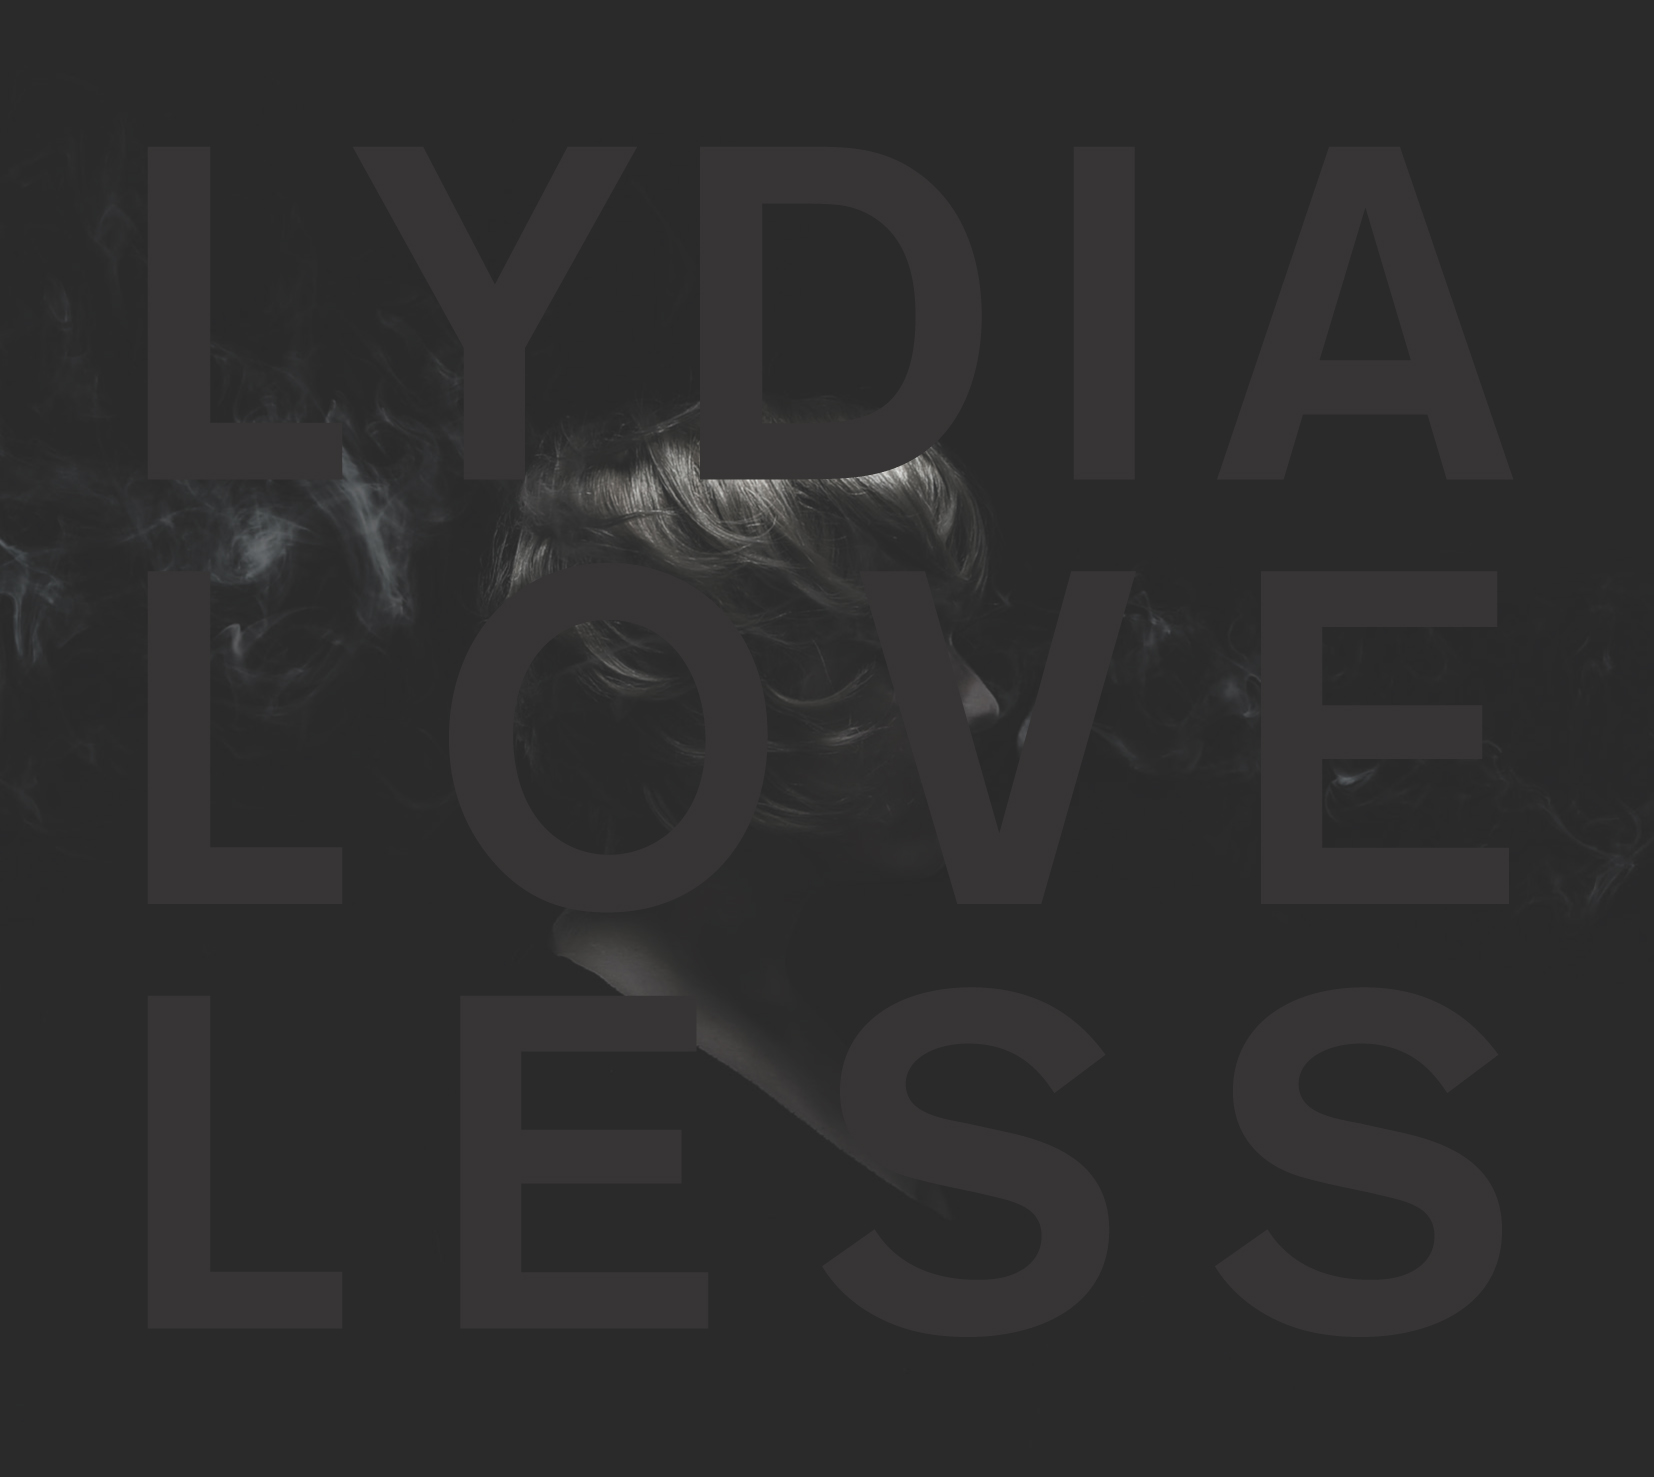 News Added Jan 03, 2014 Country punk, a genre you won't stumble upon all too often. This is Lydia Loveless and her upcoming album Somewhere Else. This is the follow-up to the critically acclaimed (well, somewhat - She's nearly there at least) to Indestructible Machine, her previous album. Submitted By mojib Track list: Added Jan […]